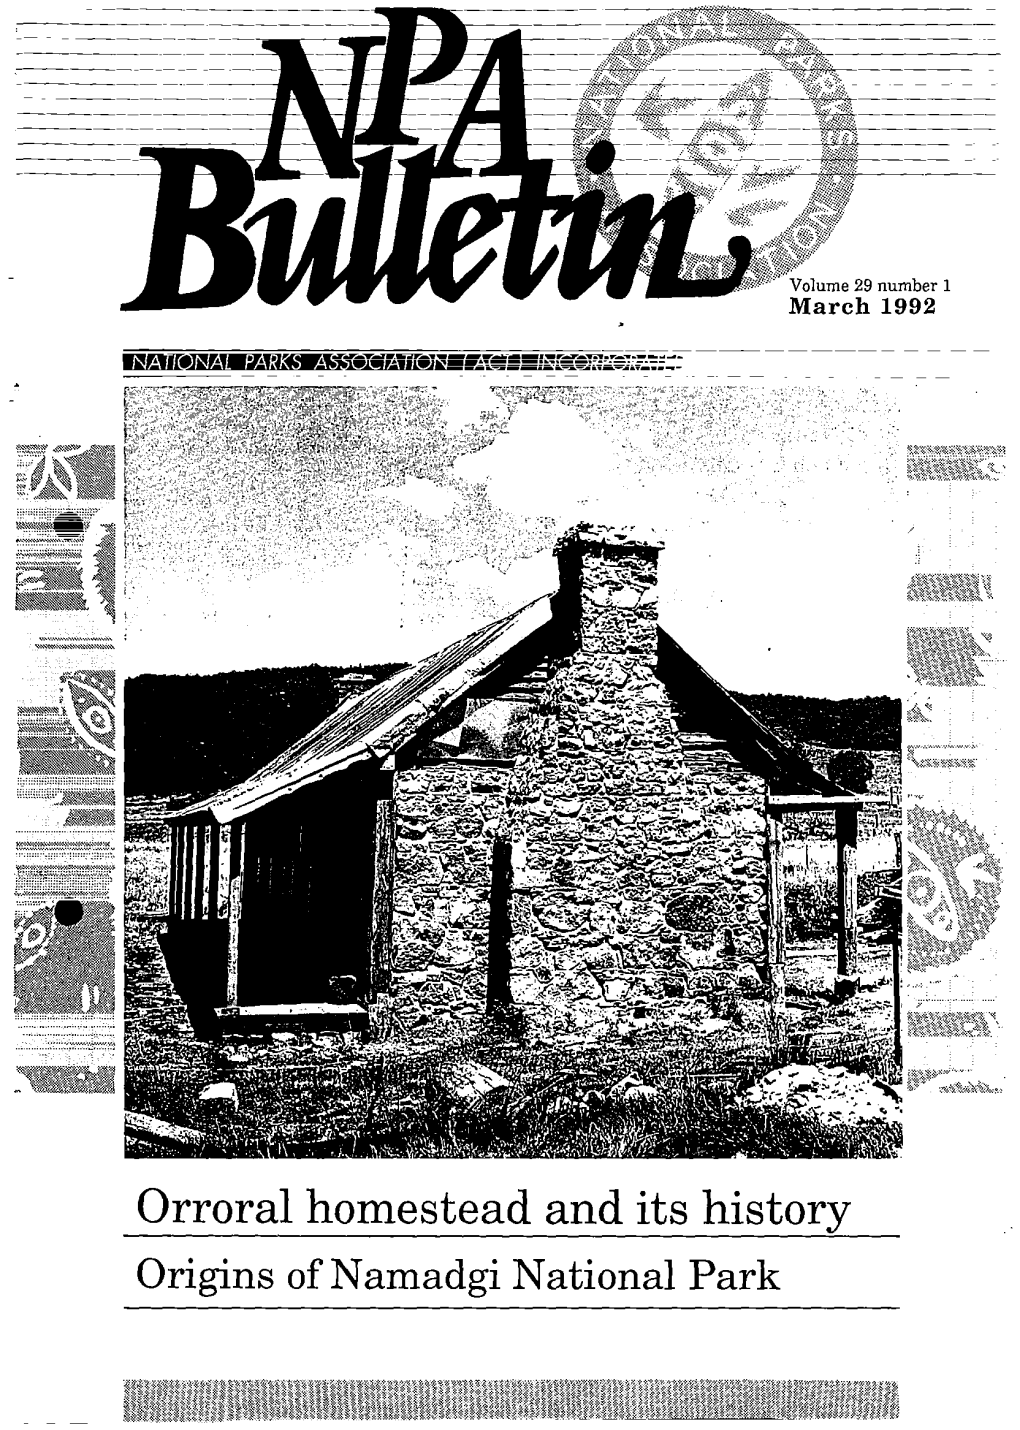 Orroral Homestead and Its History- Origins of Namadgi National Park NPA BULLETIN Vow 29 Number 1 March 1992